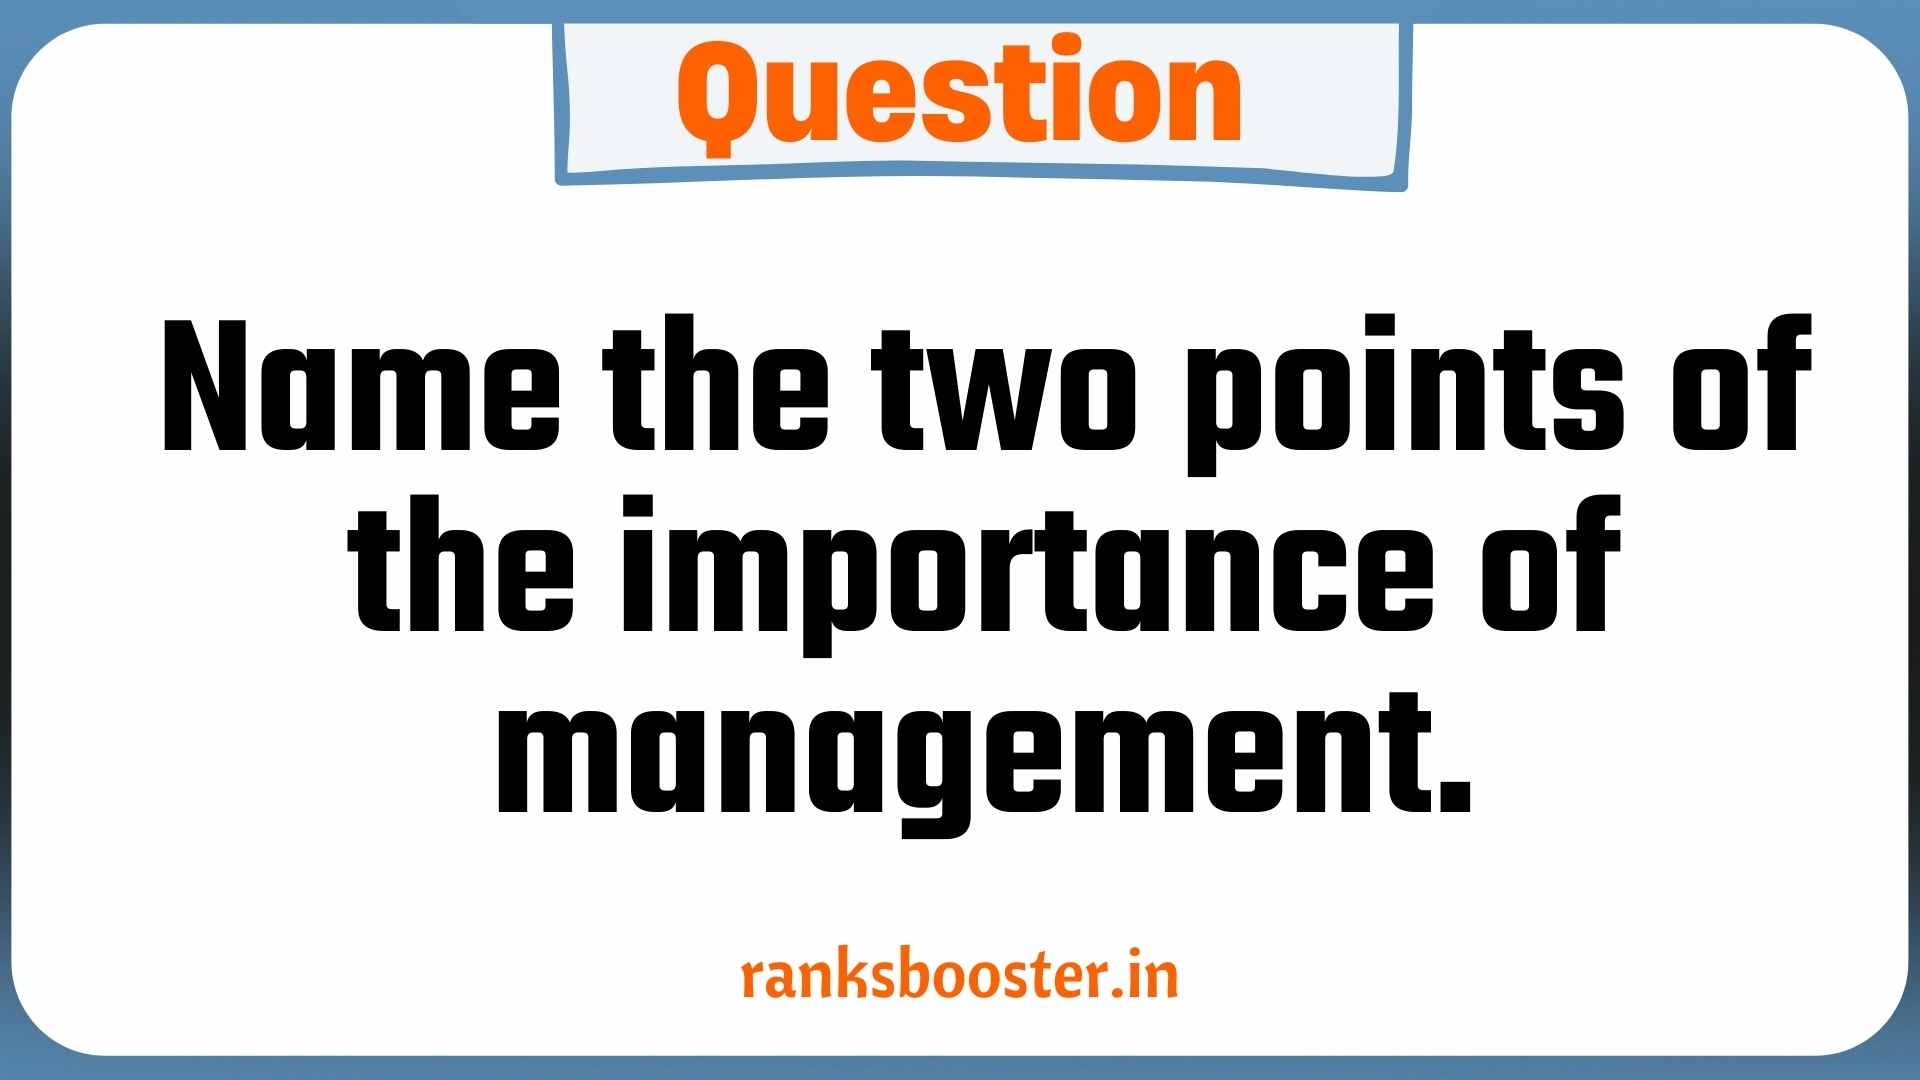 Question: Name the two points of the importance of management.